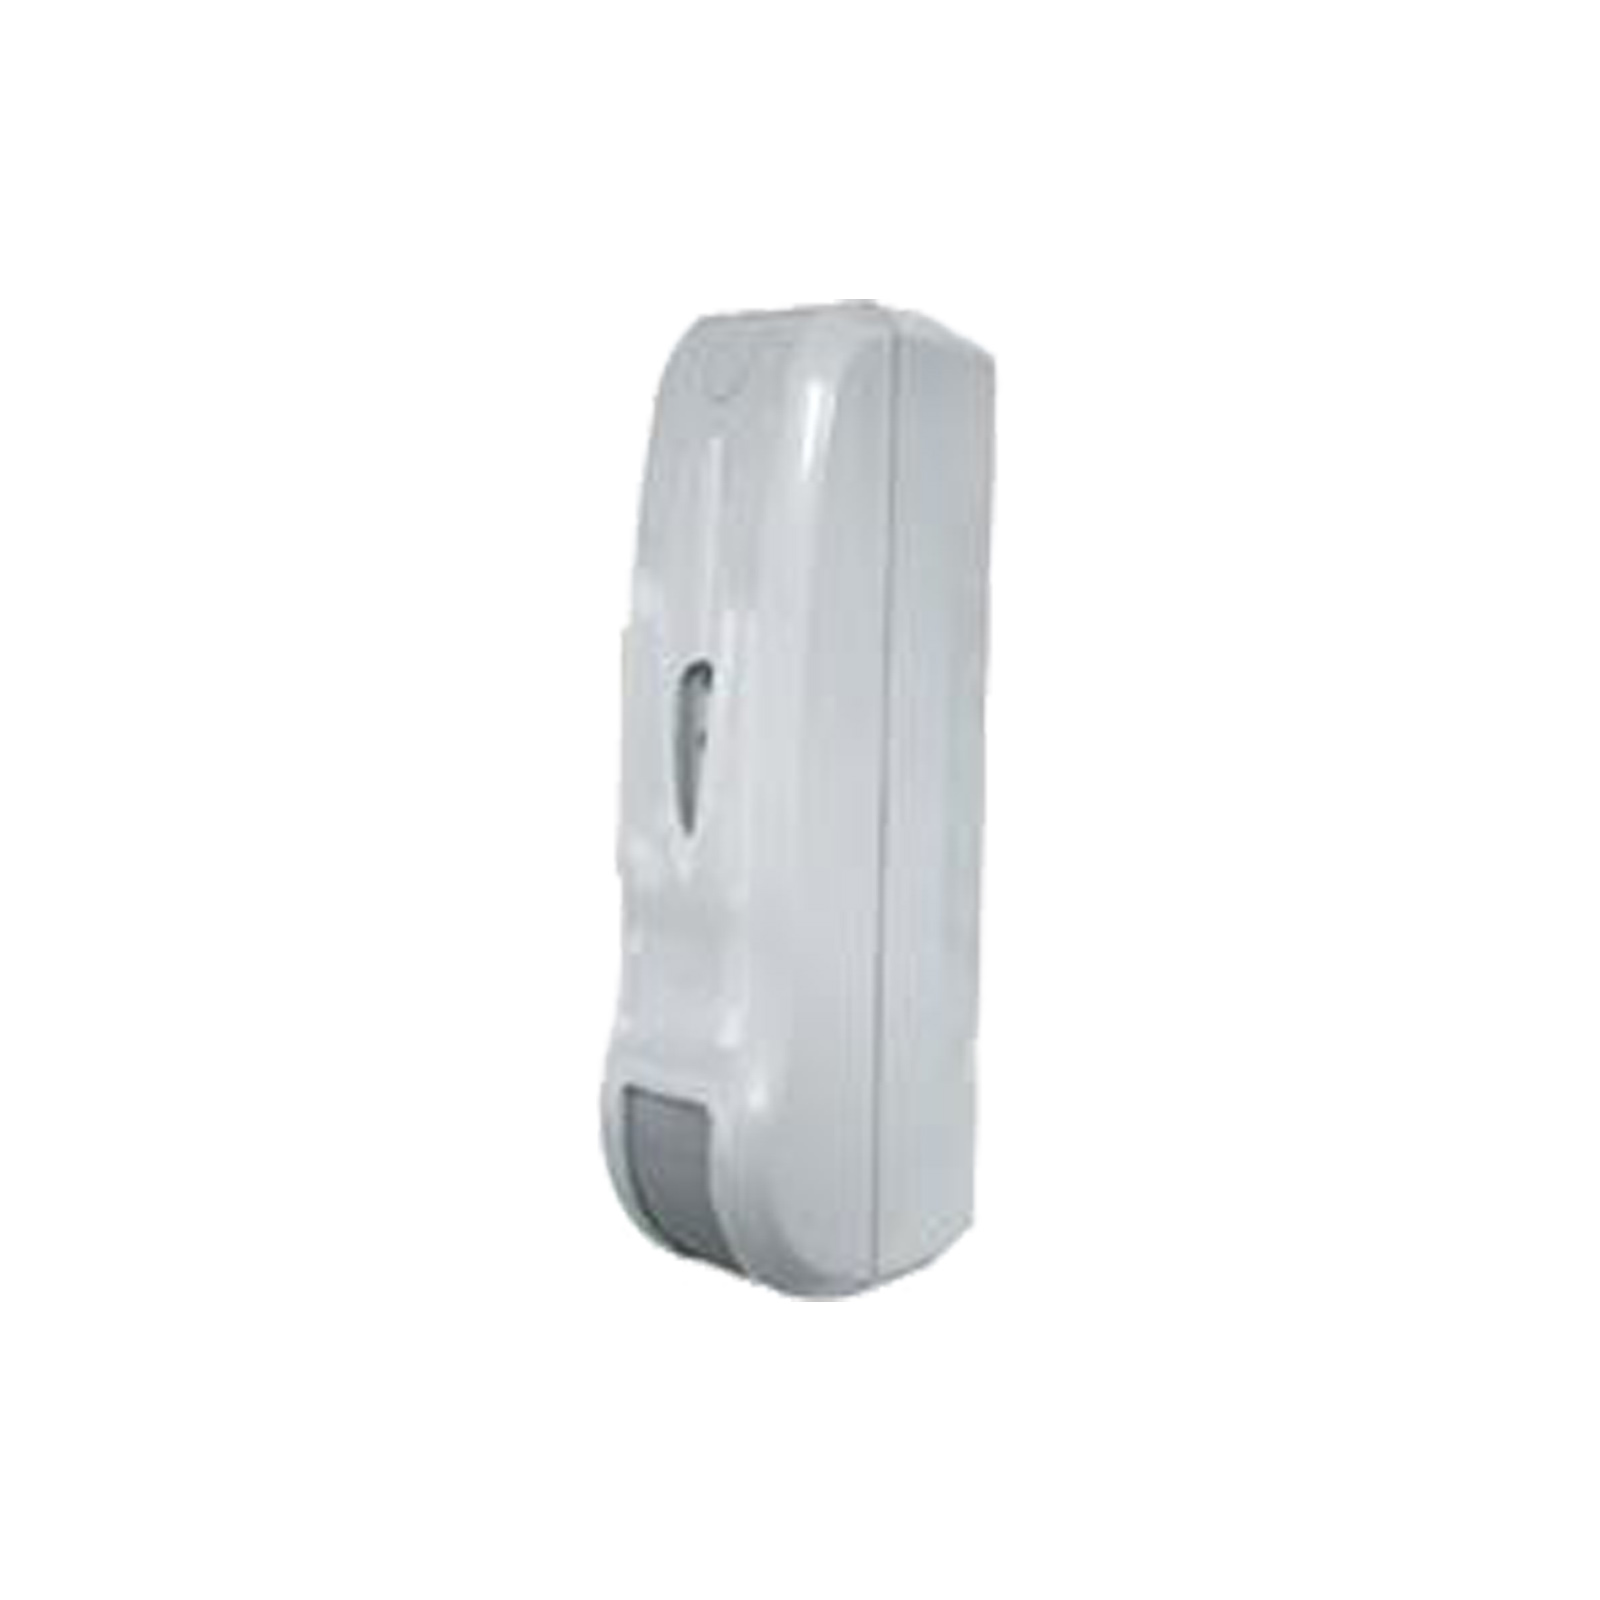 2-Way wireless outdoor Dual Technology detector